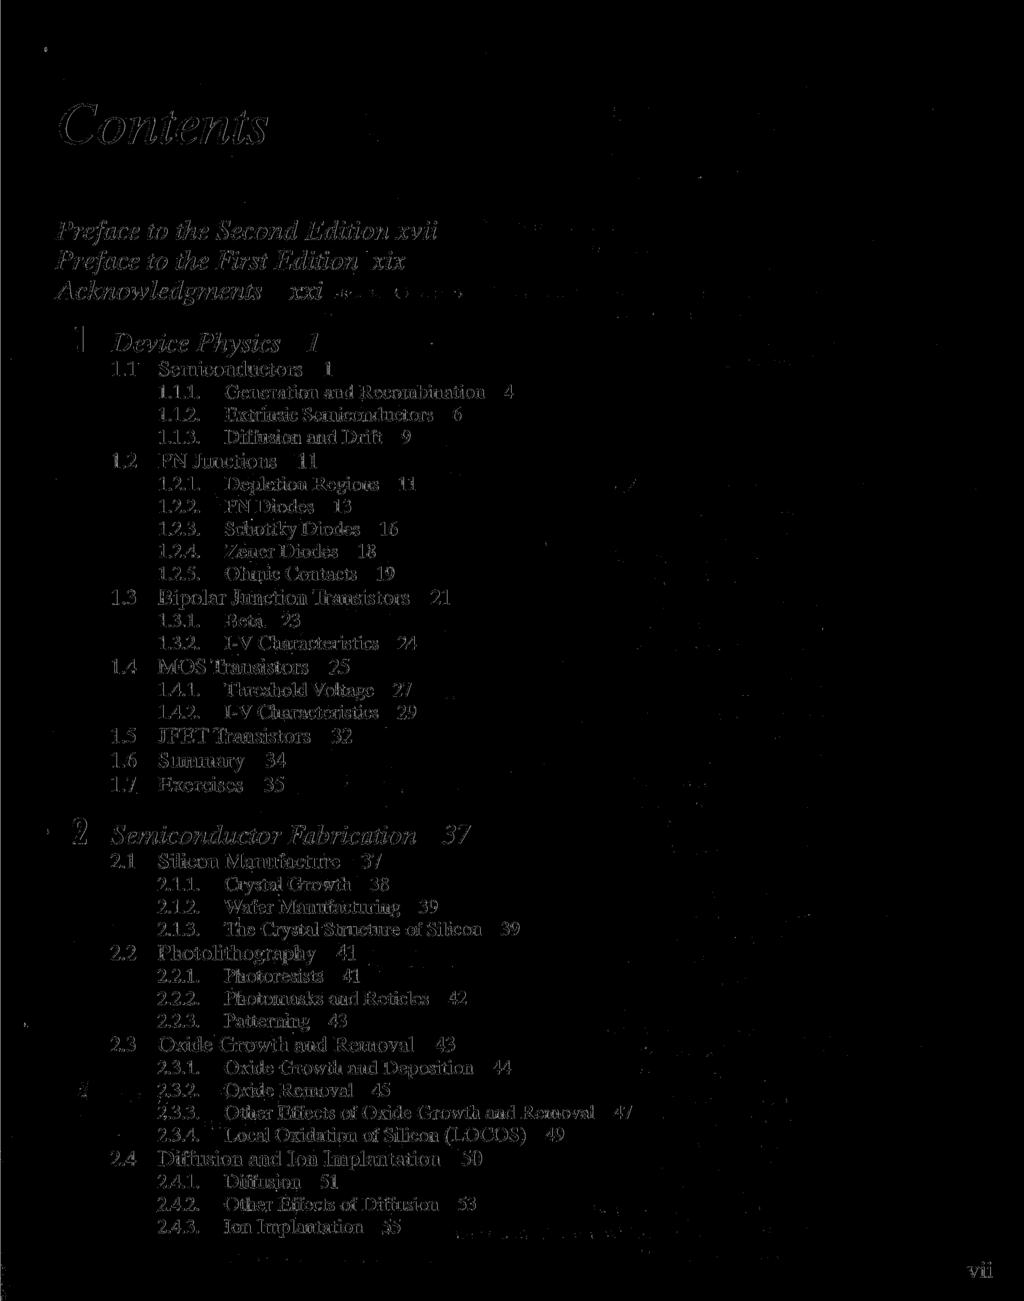 Contents Preface to the Second Edition xvii Preface to the First Edition xix Acknowledgments xxi 1 Device Physics 1 1.1 Semiconductors 1 1.1.1. Generation and Recombination 4 1.1.2.